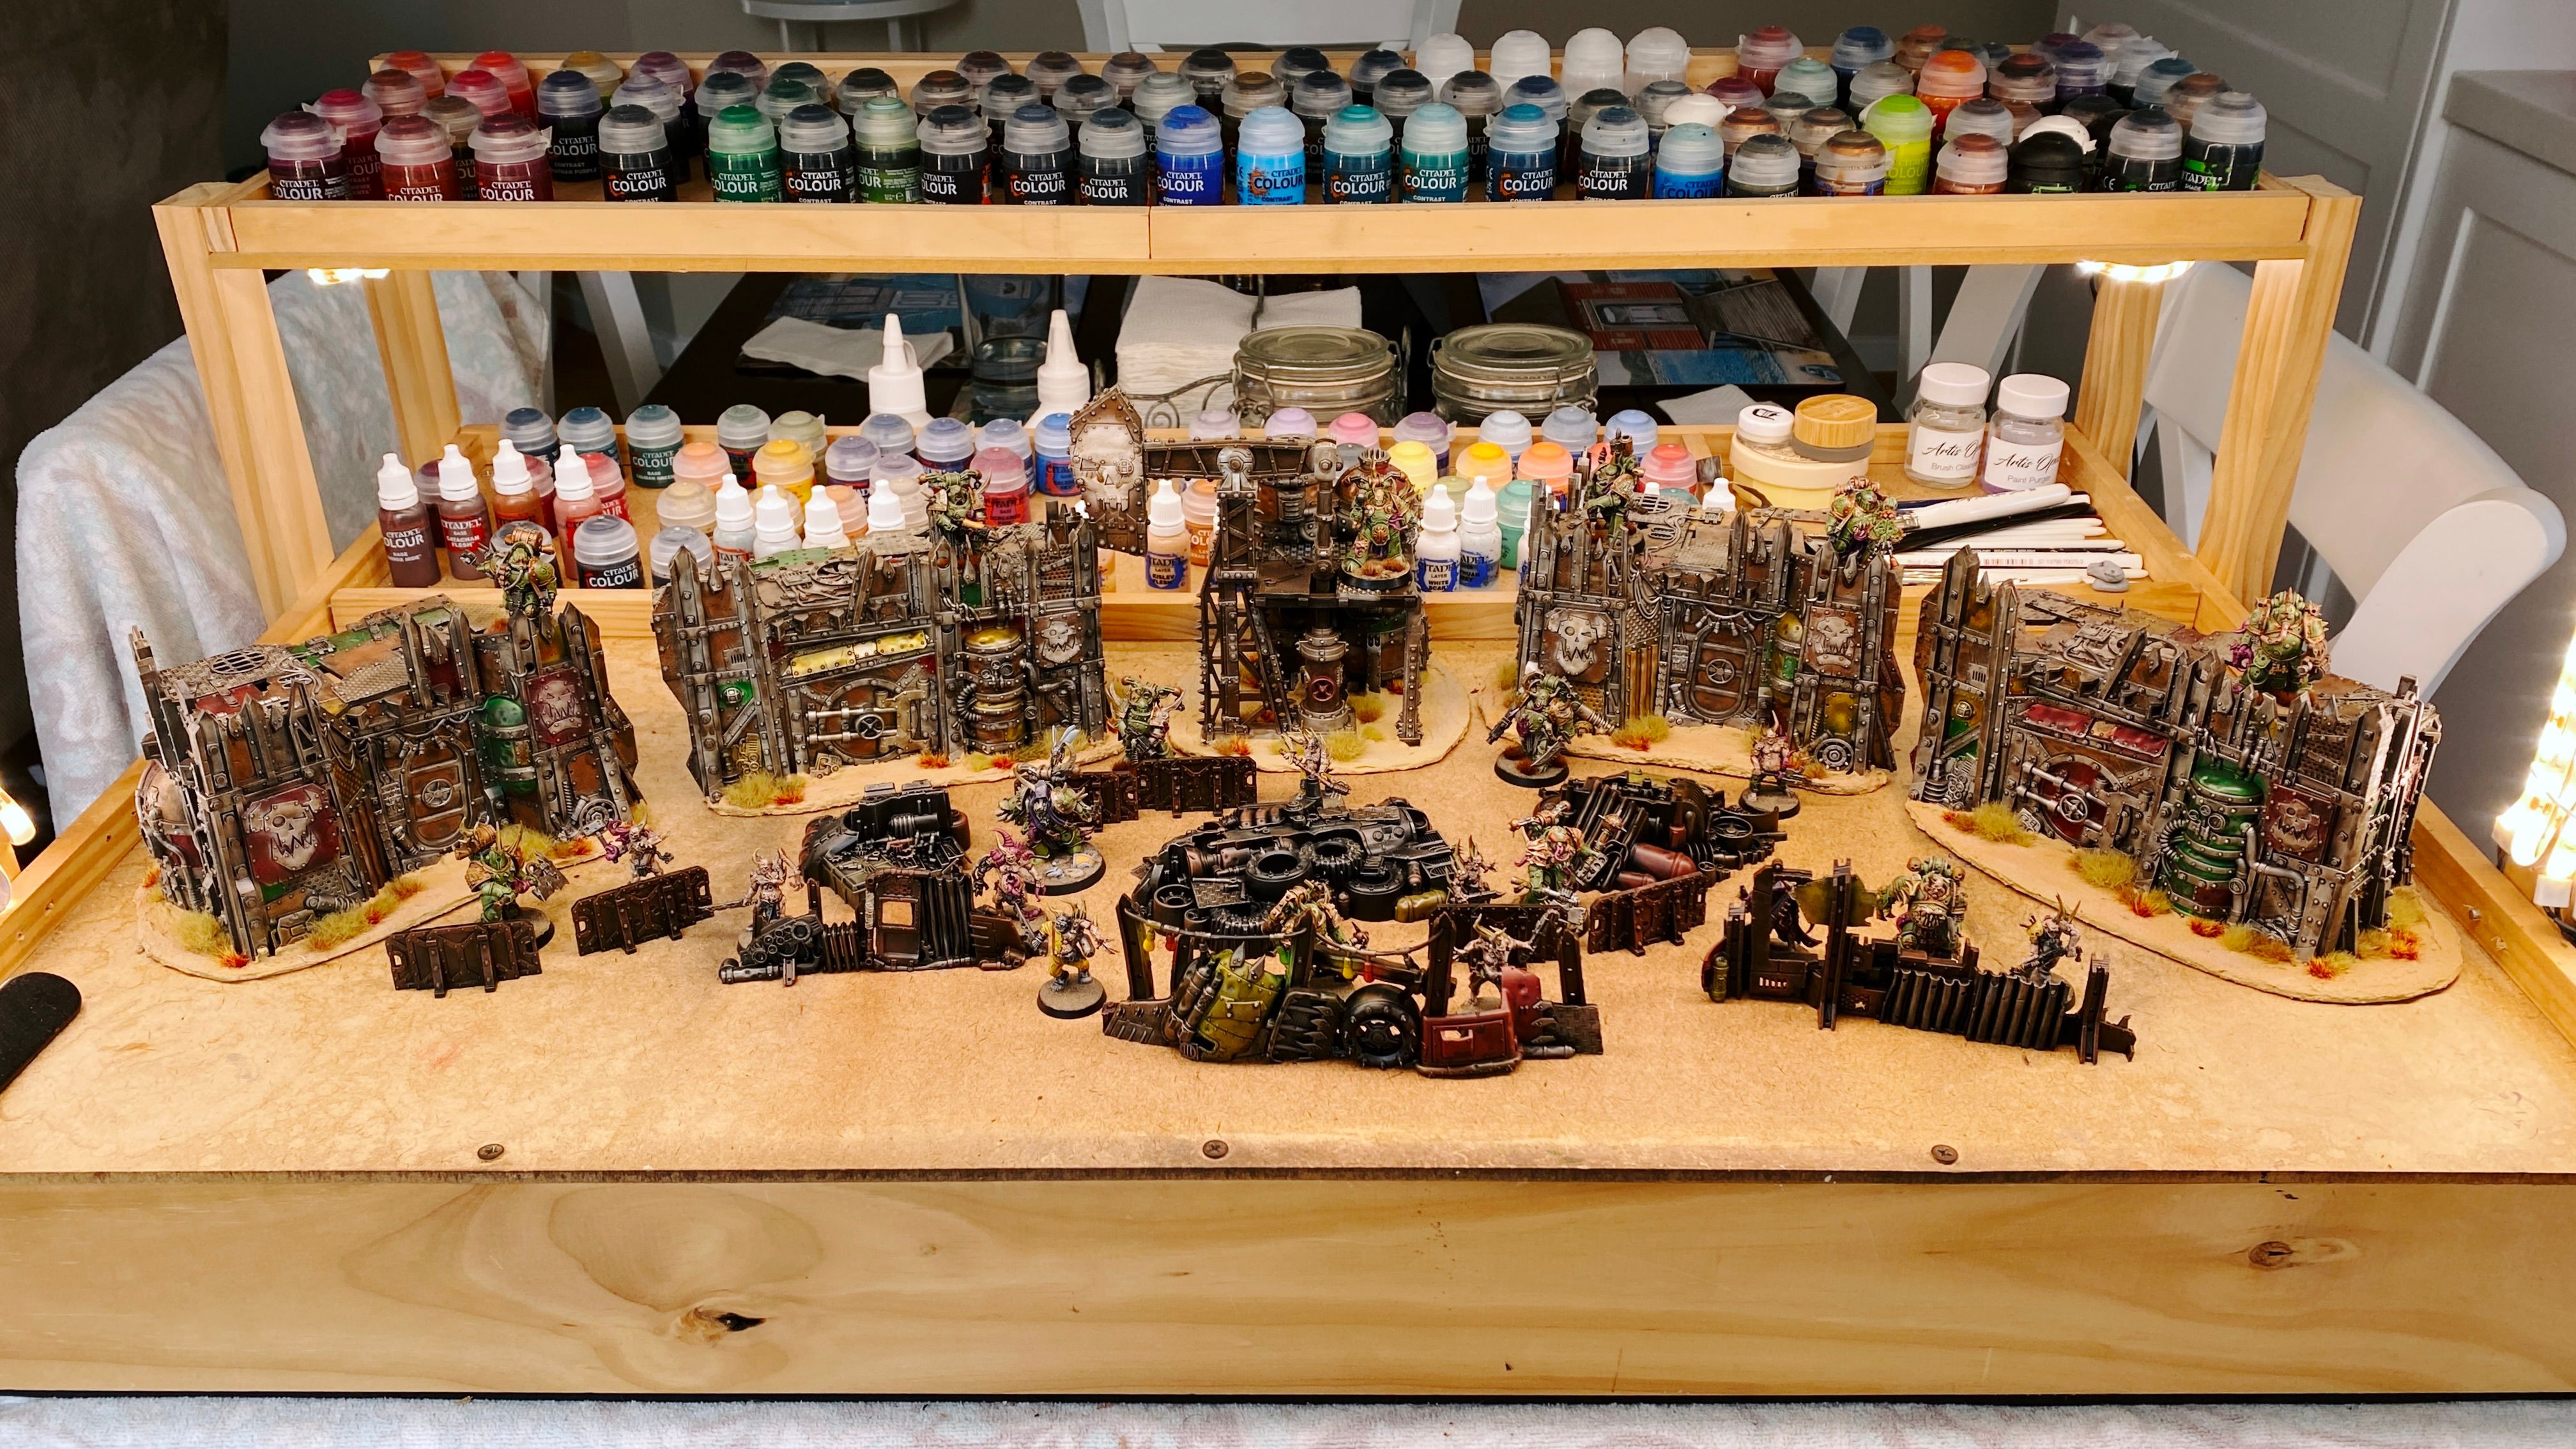 A photo of entire set of EXTREMELY ramshackle pieces of terrain from the Warhammer 40,000 Kill Team: Octarius box from Games Workshop. At the back are four parts of an Ork fort that look like they belong in a junk yard, the walls and platform on top are made up of a whole ton of pieces of metal scrap, like big plates, corrugated pieces, massive beams, there's a door in there, and a couple of empty gas cylinders. There's also an old rig thing with the big pumping arm in the same ramshackle style, and scattered in front of these larger pieces are piles of scrap metal and chest-high walls also made out of all sorts of pieces of scrap.

All the big pieces are on cut-out pieces of cardboard that are covered in a texture paint that makes it look like sand, and there's various tufts of dry grasses growing around the base of the walls.